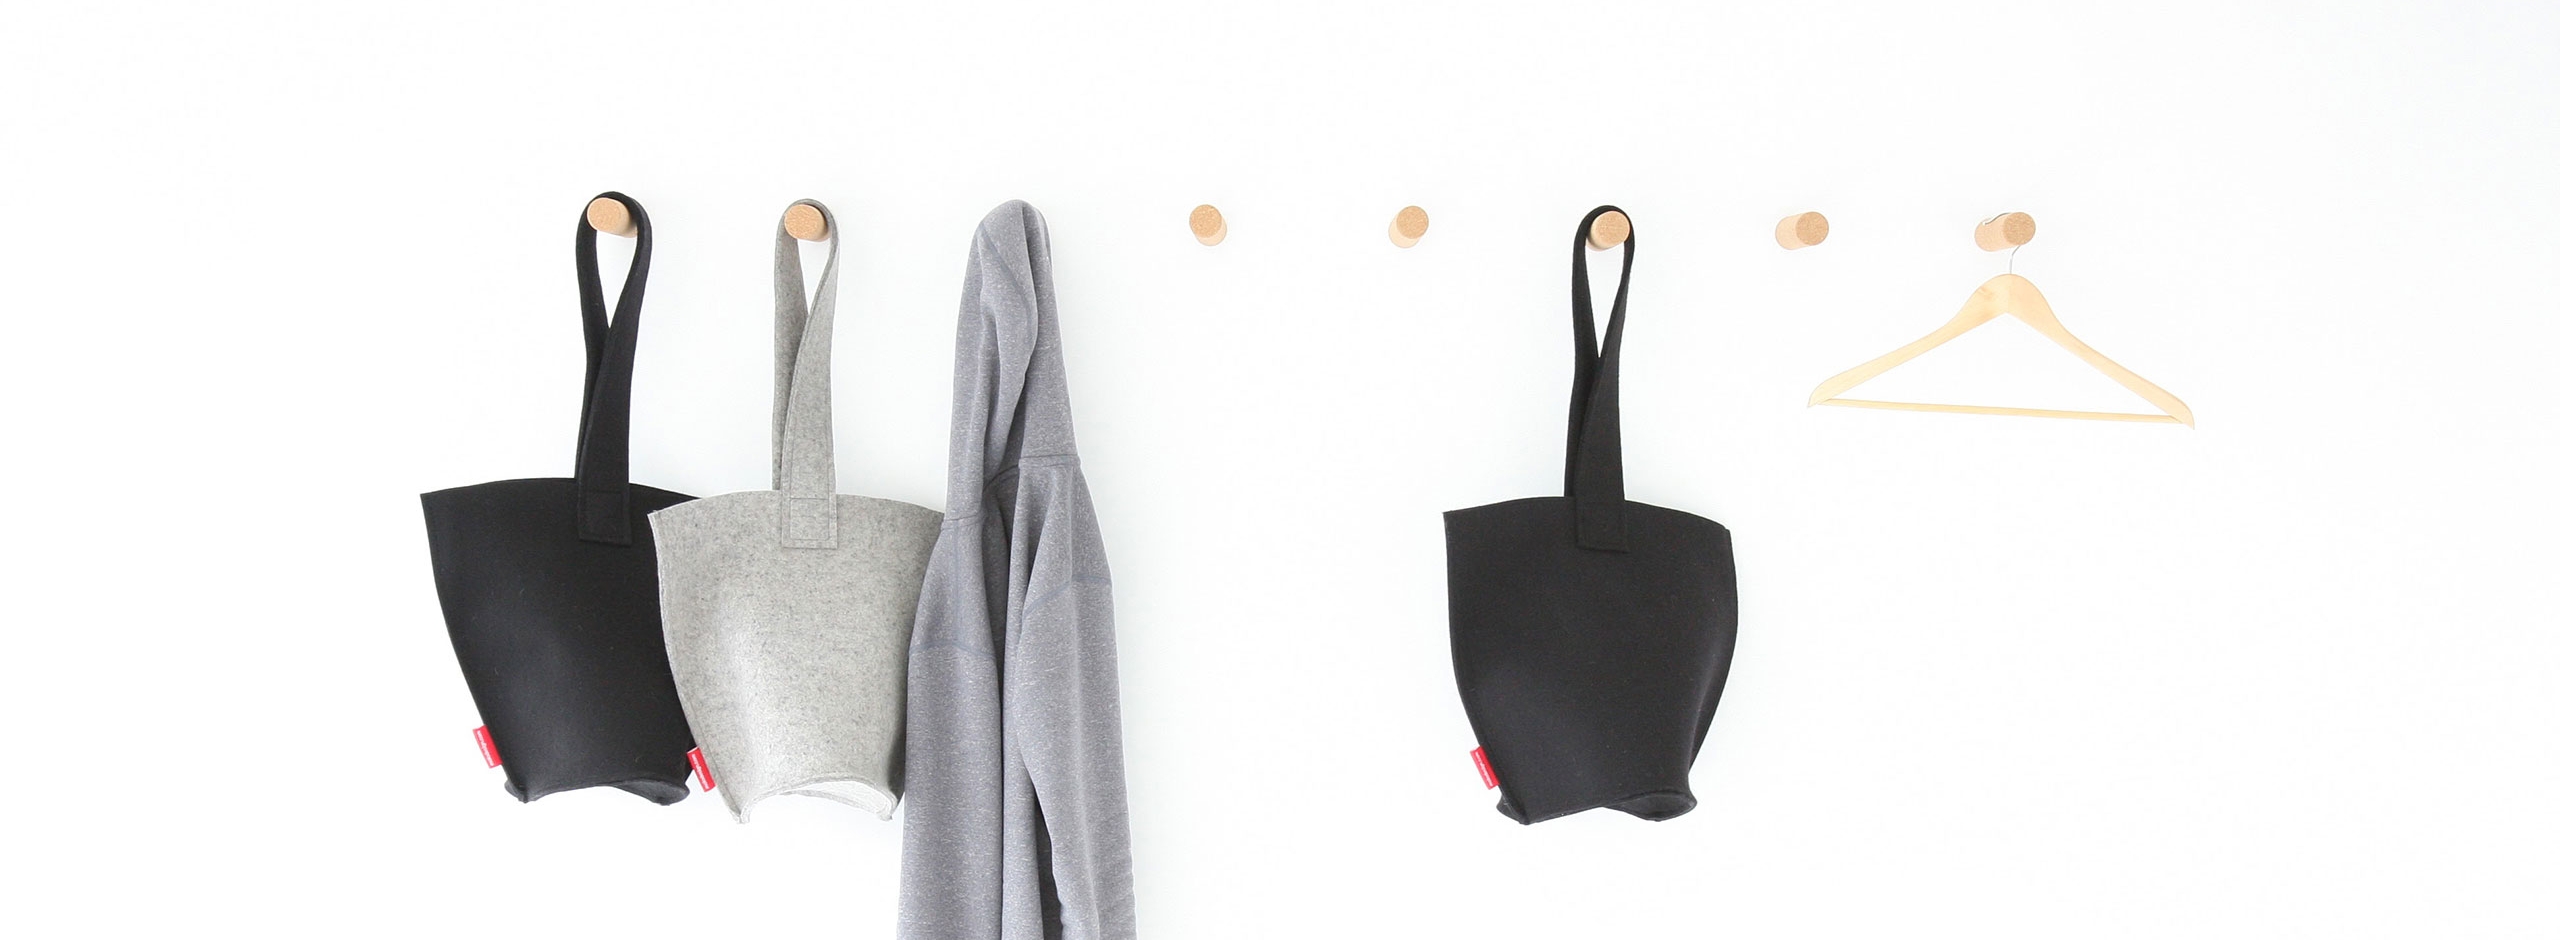 a sweater and hobo bags hang from cork peg